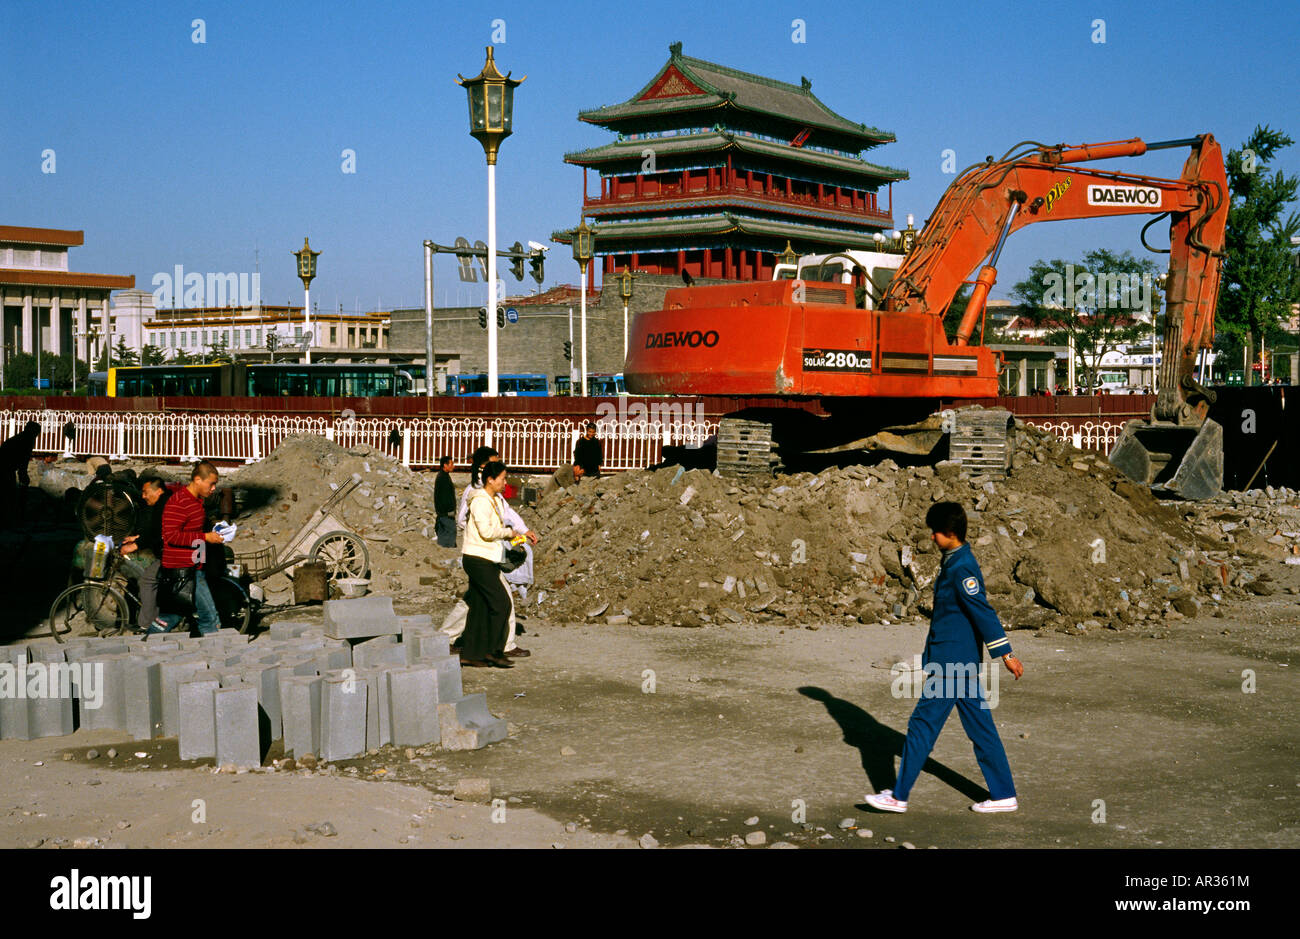 October 28, 2006 - Beijing gets ready for the Olympic Games 2008. Dazhlan neighbourhood being demolished [Qianmen Gate at back]. Stock Photo